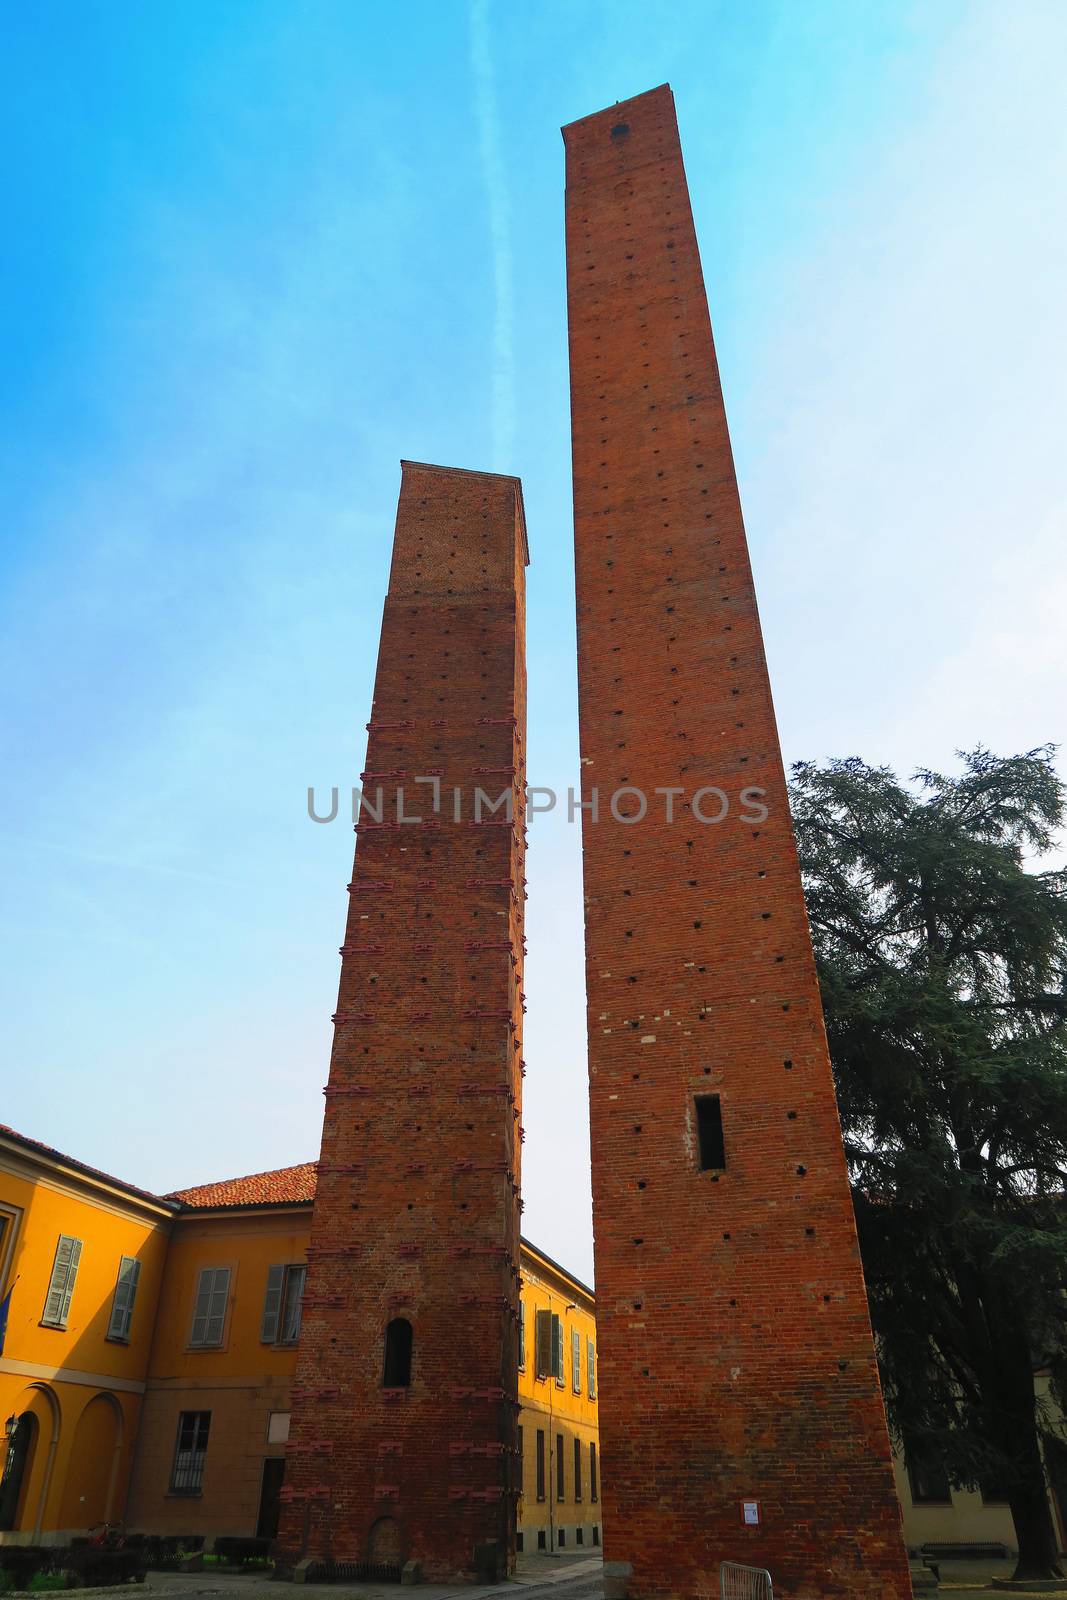 Medieval towers in Pavia, Italy by dav76